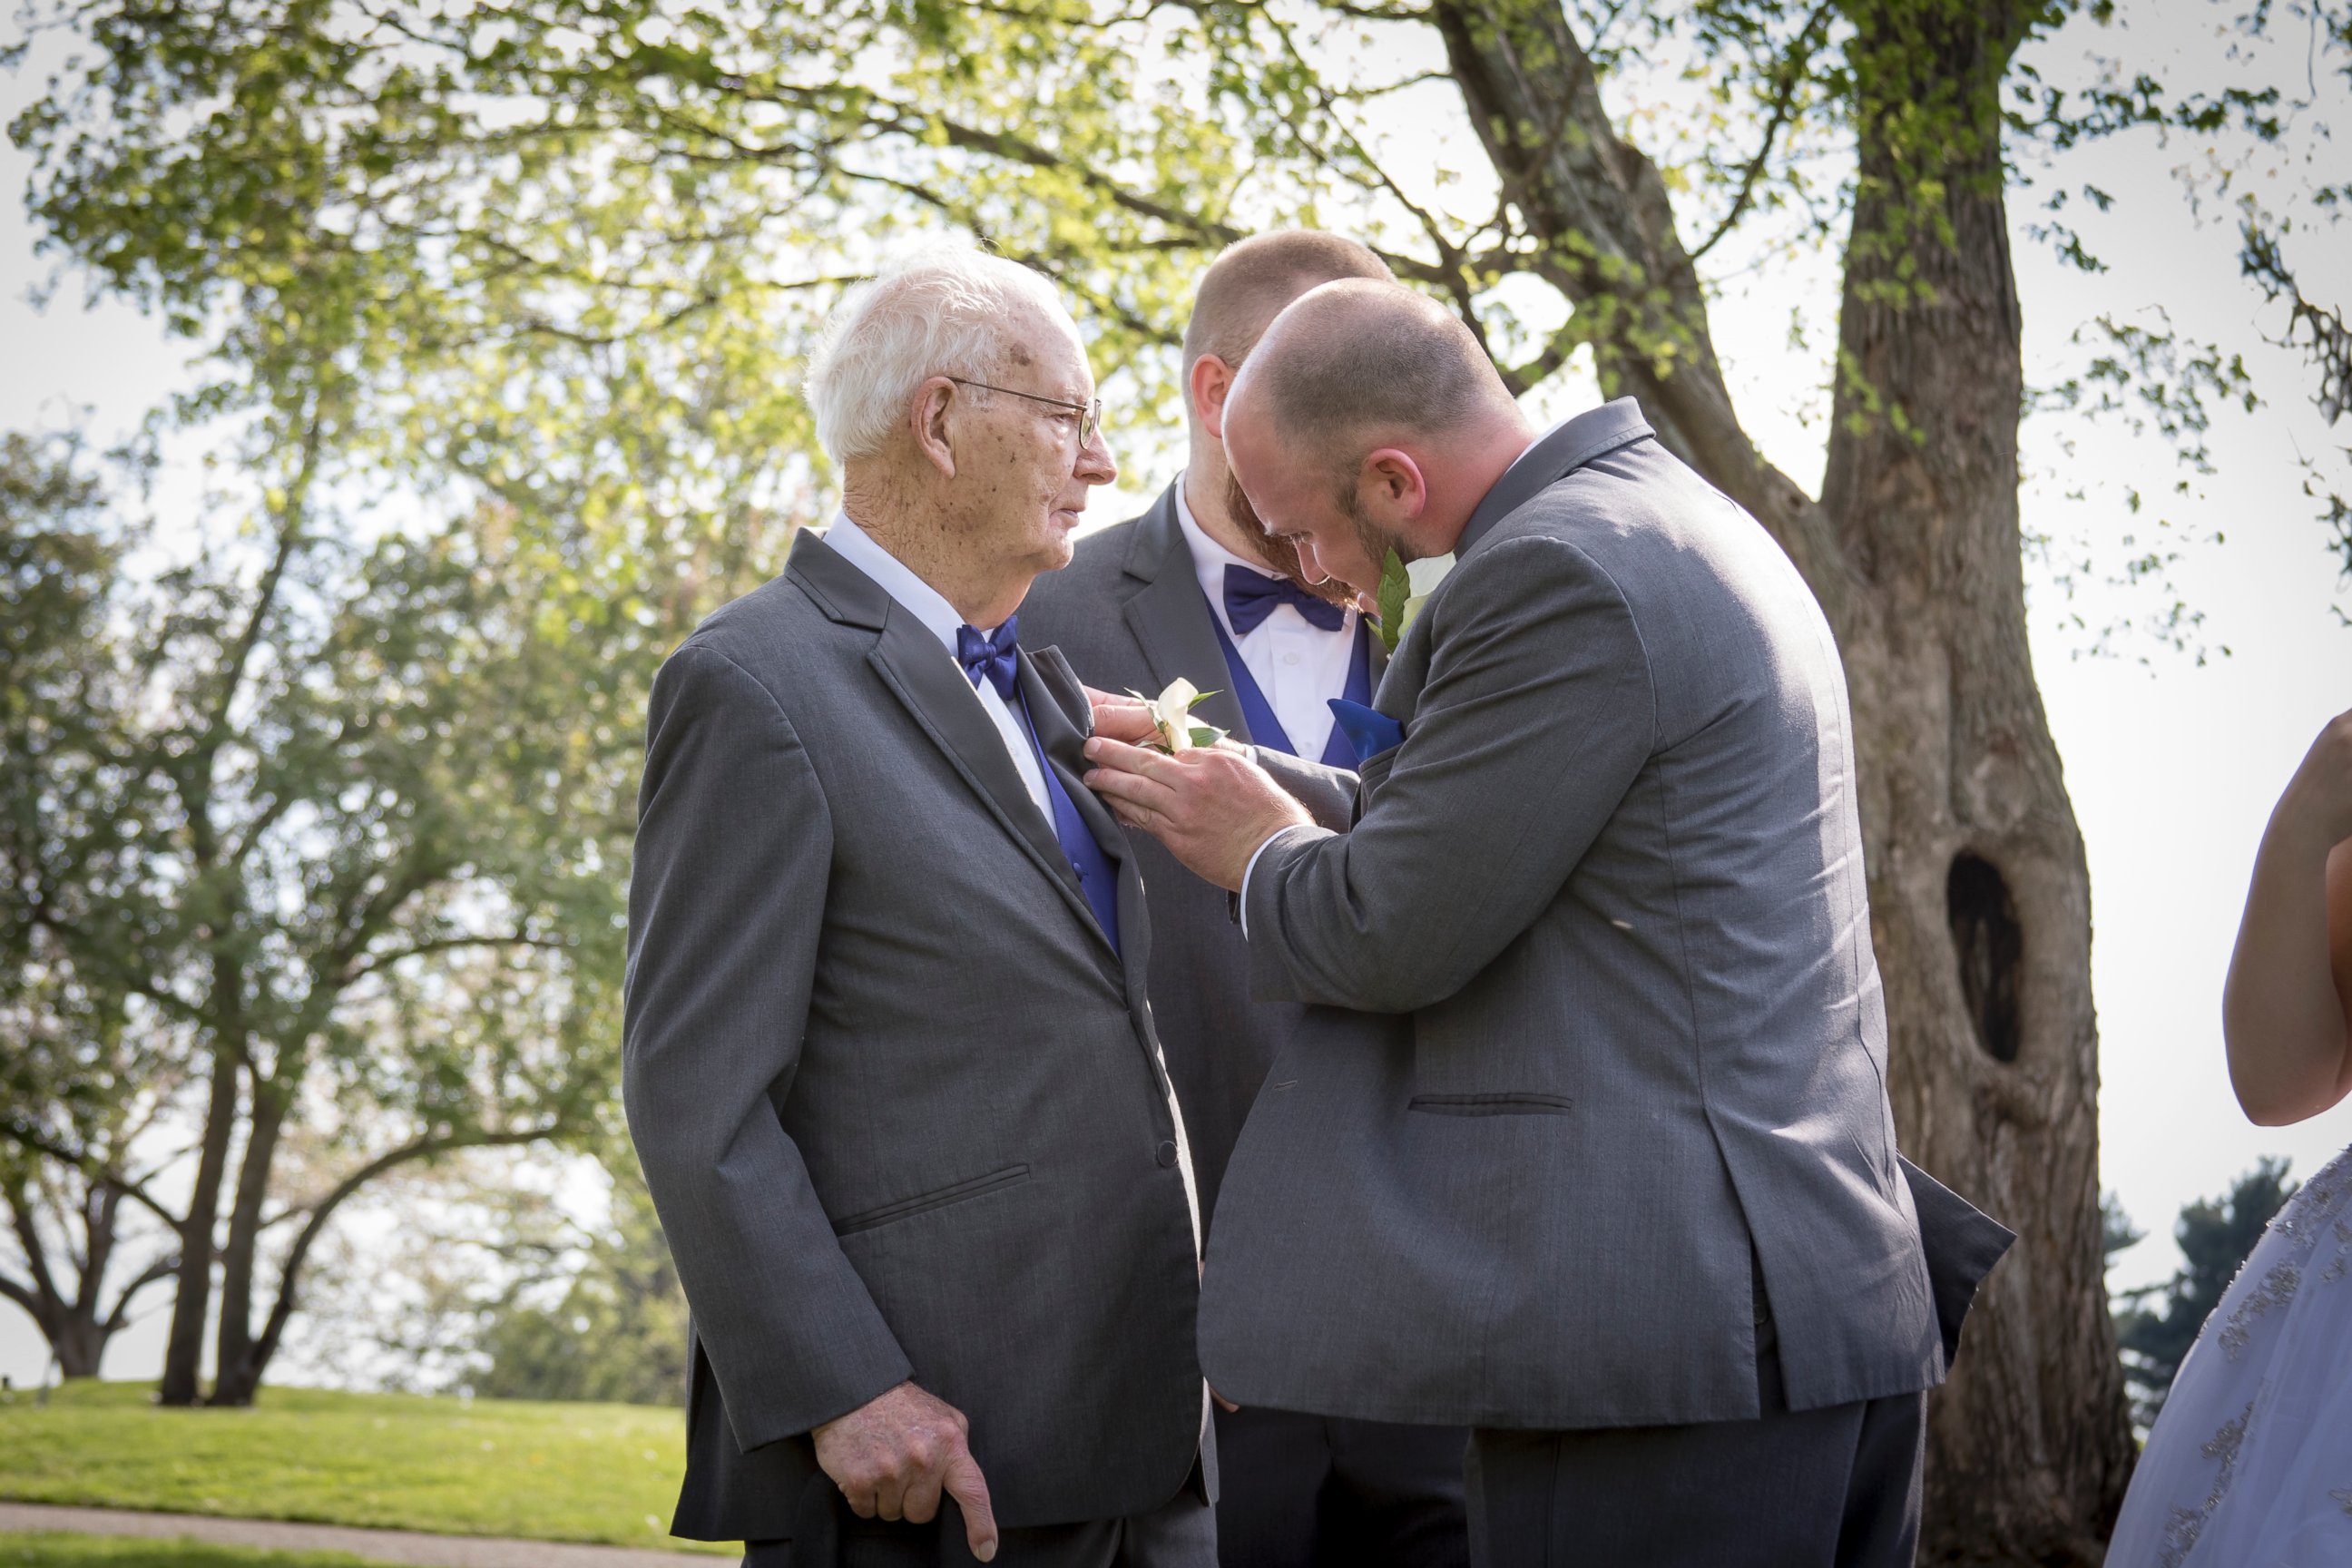 PHOTO: KC Schafer of Clarksville, Indiana, said he always knew he wanted his grandpa, Charles Schafer, 90, to be his best man. 